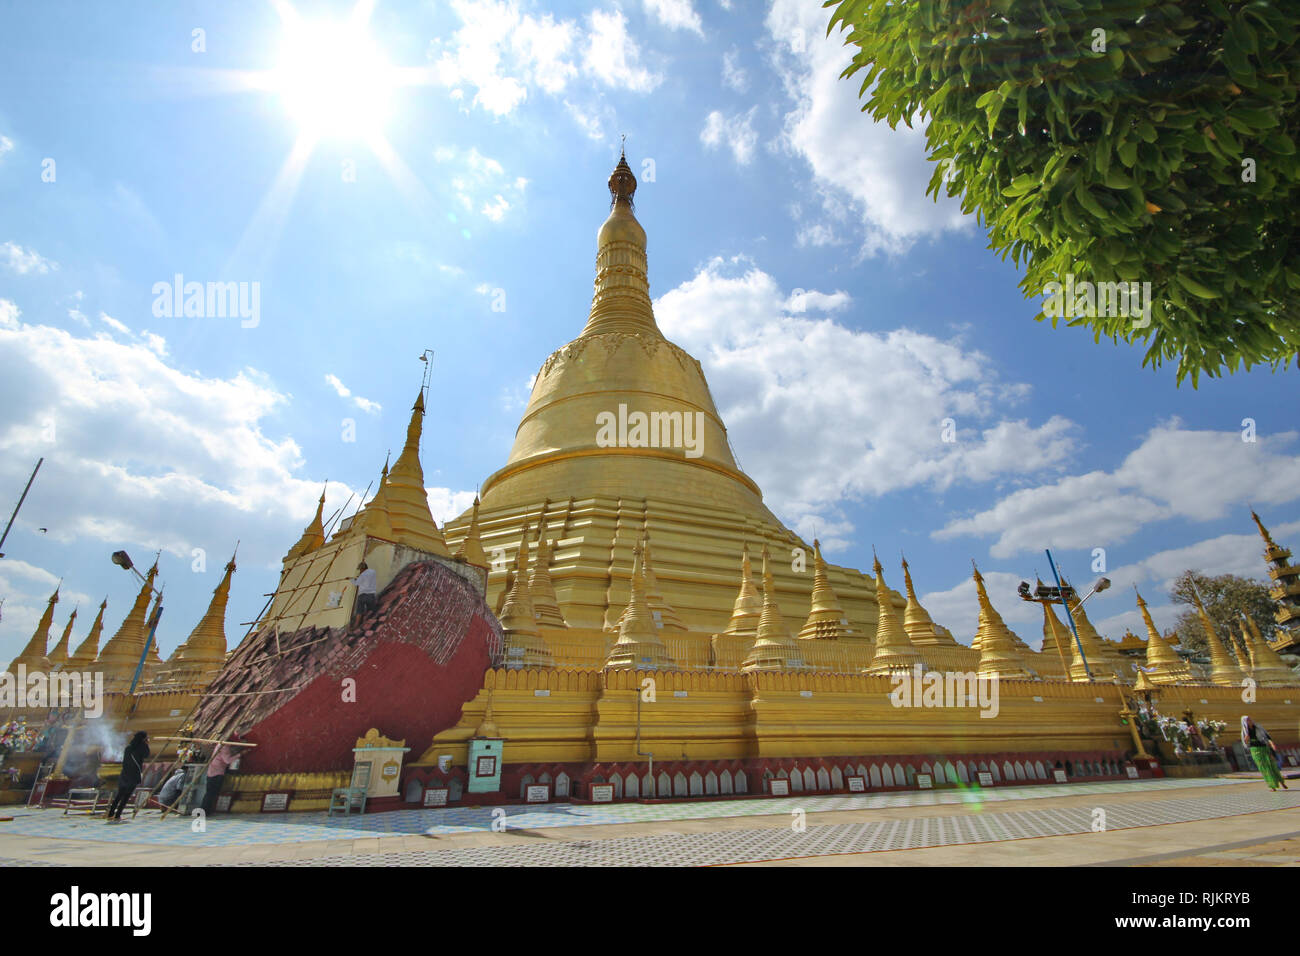 Bago, Myanmar,Feb 2,2018, Take photo the Shwemawdaw Pagoda ,the tallest pagoda in Myanmar, referred to as the Golden God Temple Stock Photo